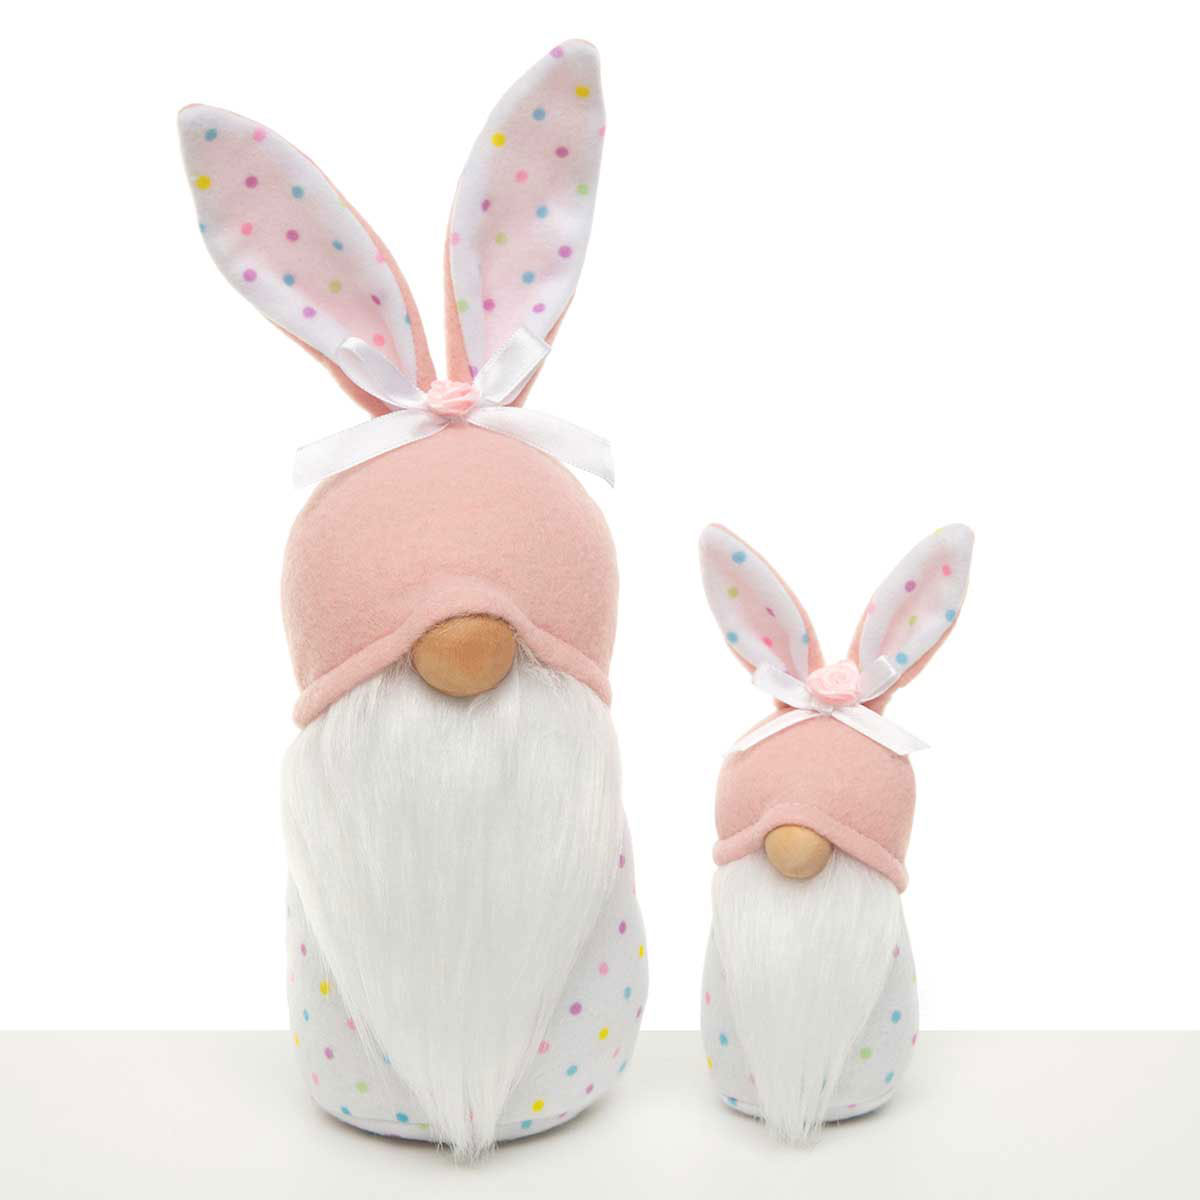 b70 GNOME PINDOT BUNNY SMALL 2.5IN X 4IN X 6.5IN WHITE/PINK